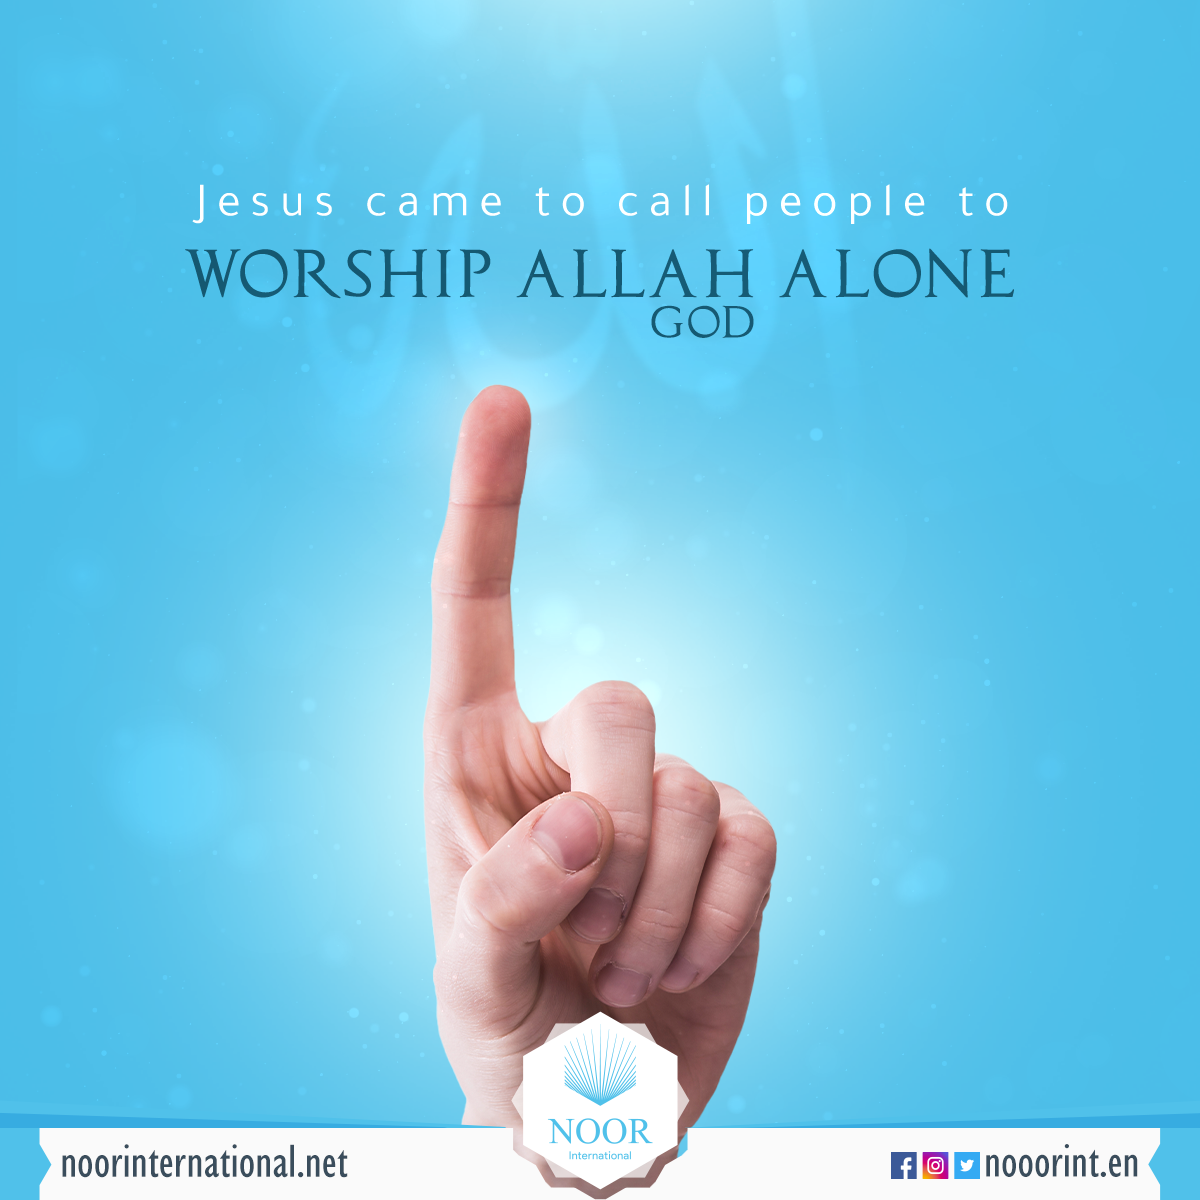 The Christ came to call people to worship Allah alone